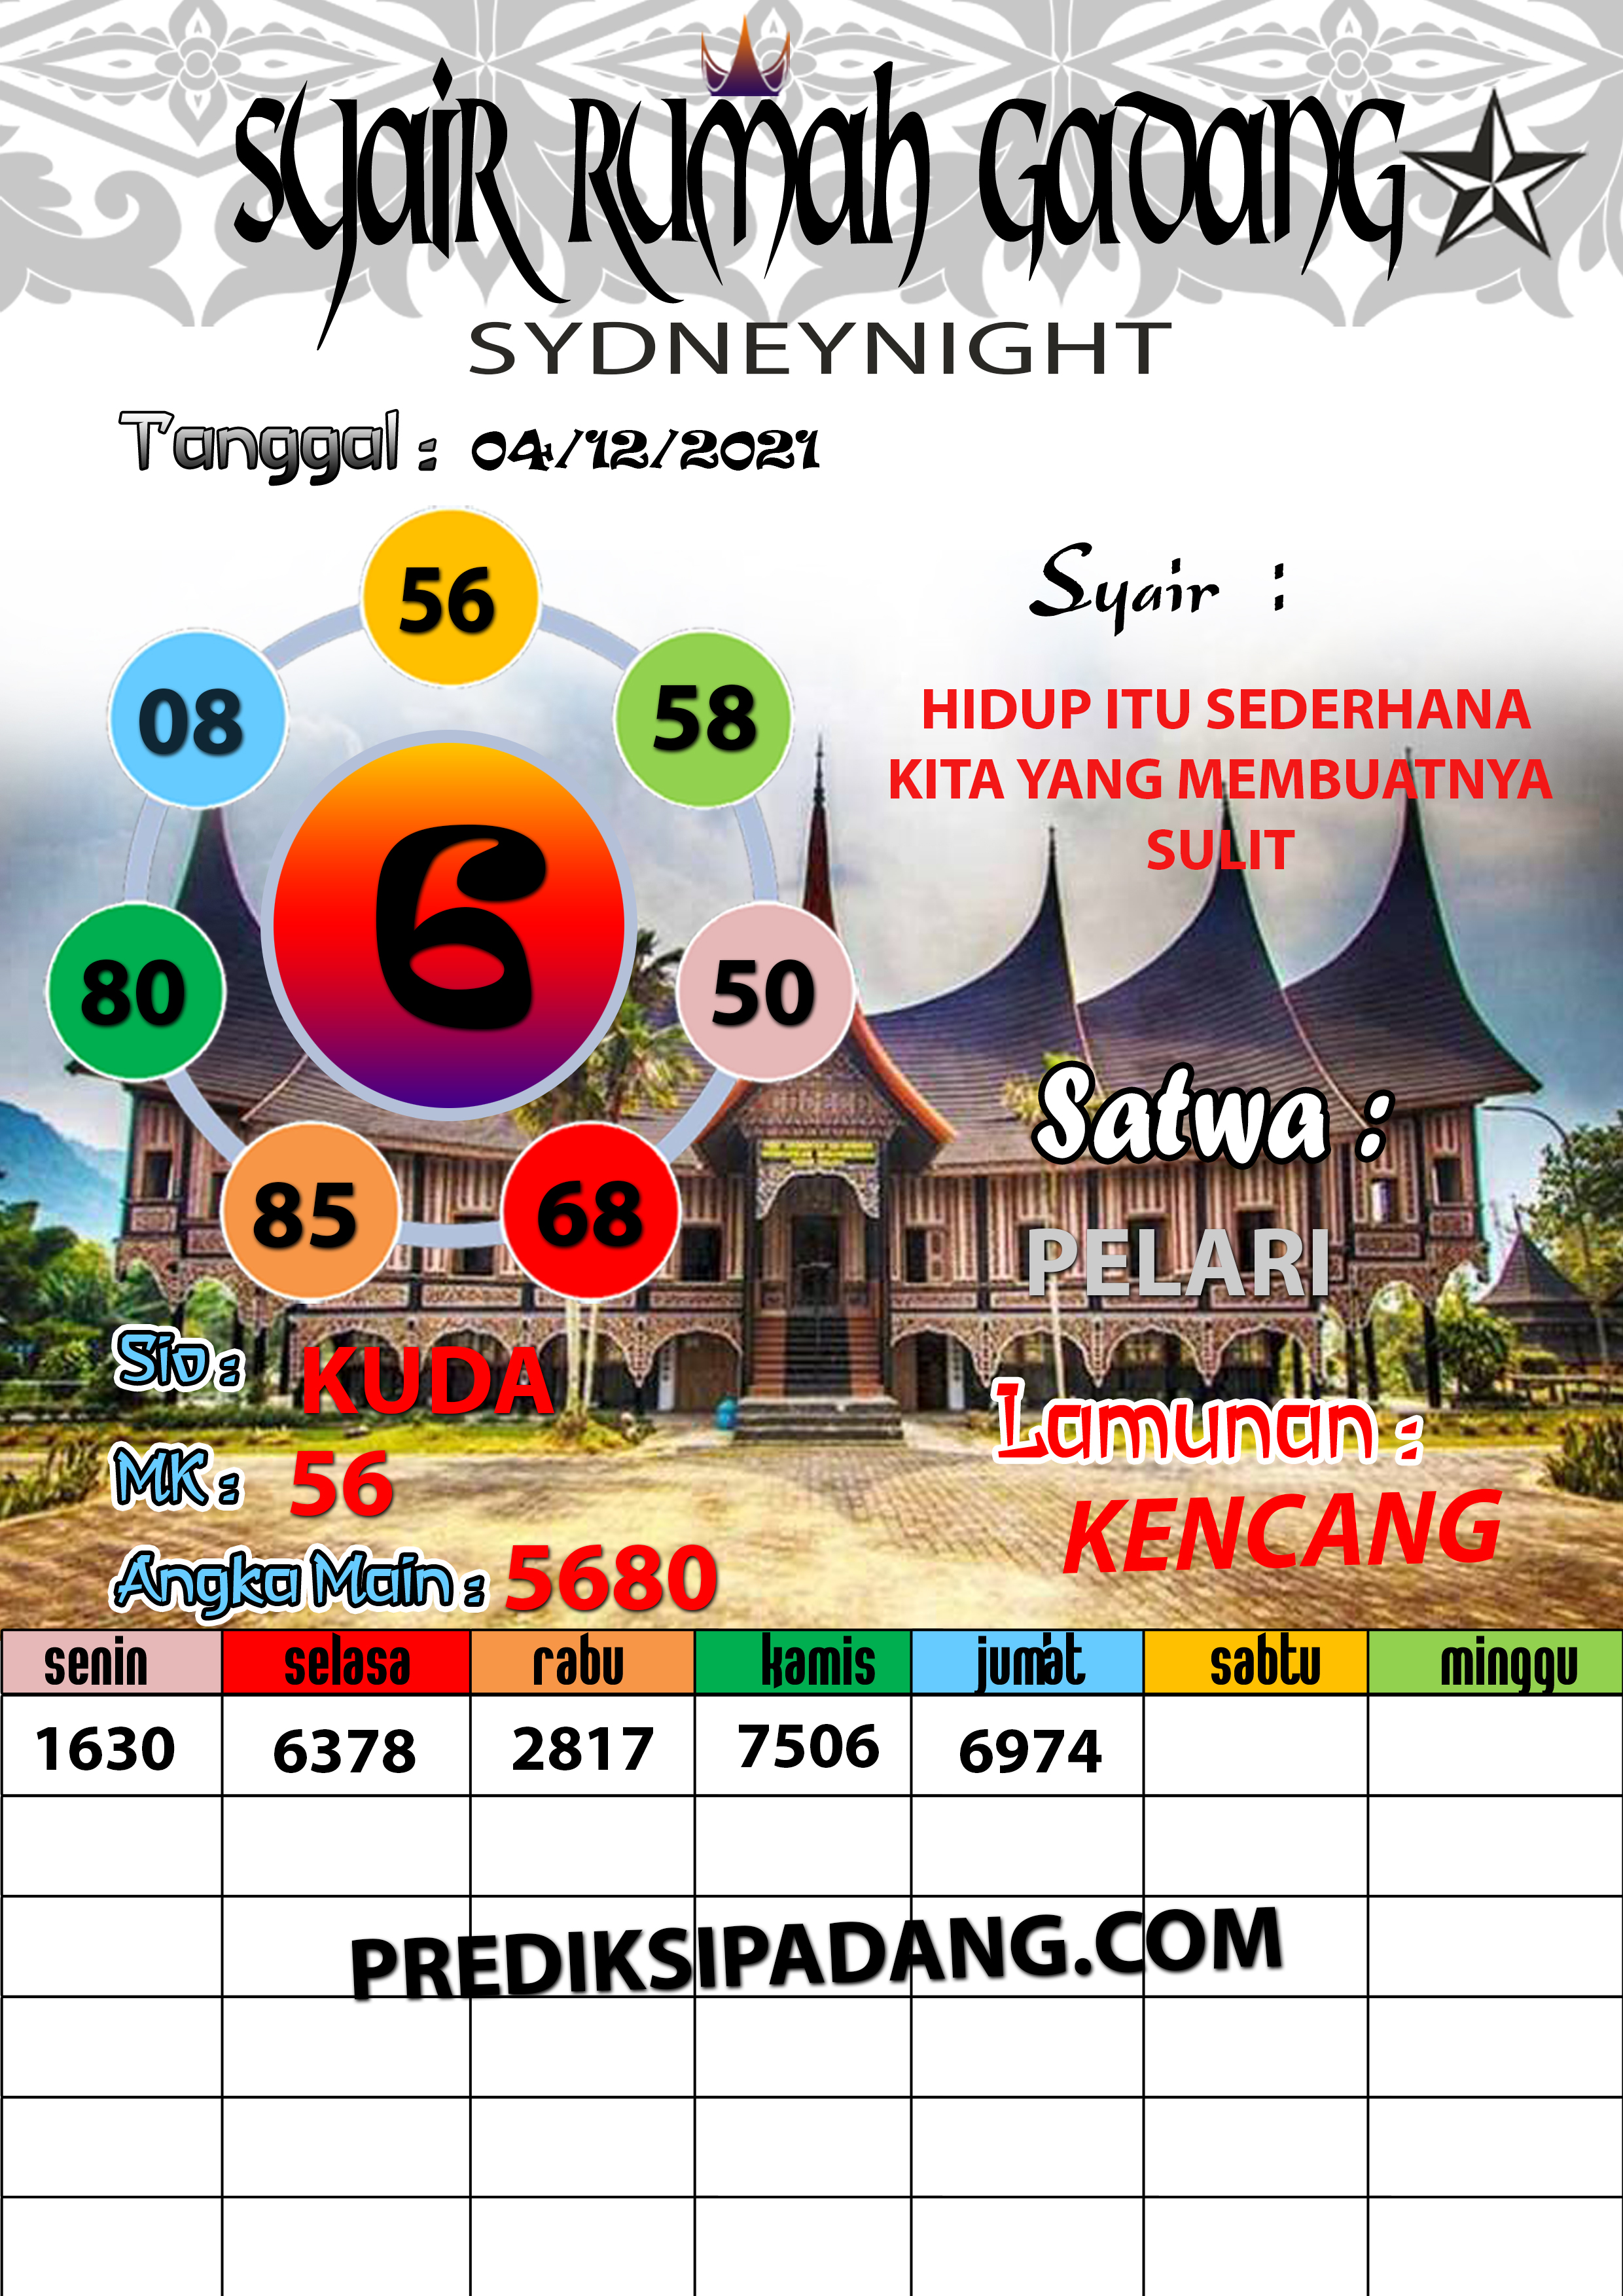 PADANG%20TOTO%20SIDNEYNIGHT-Recovered-Recovered%283%29.jpg